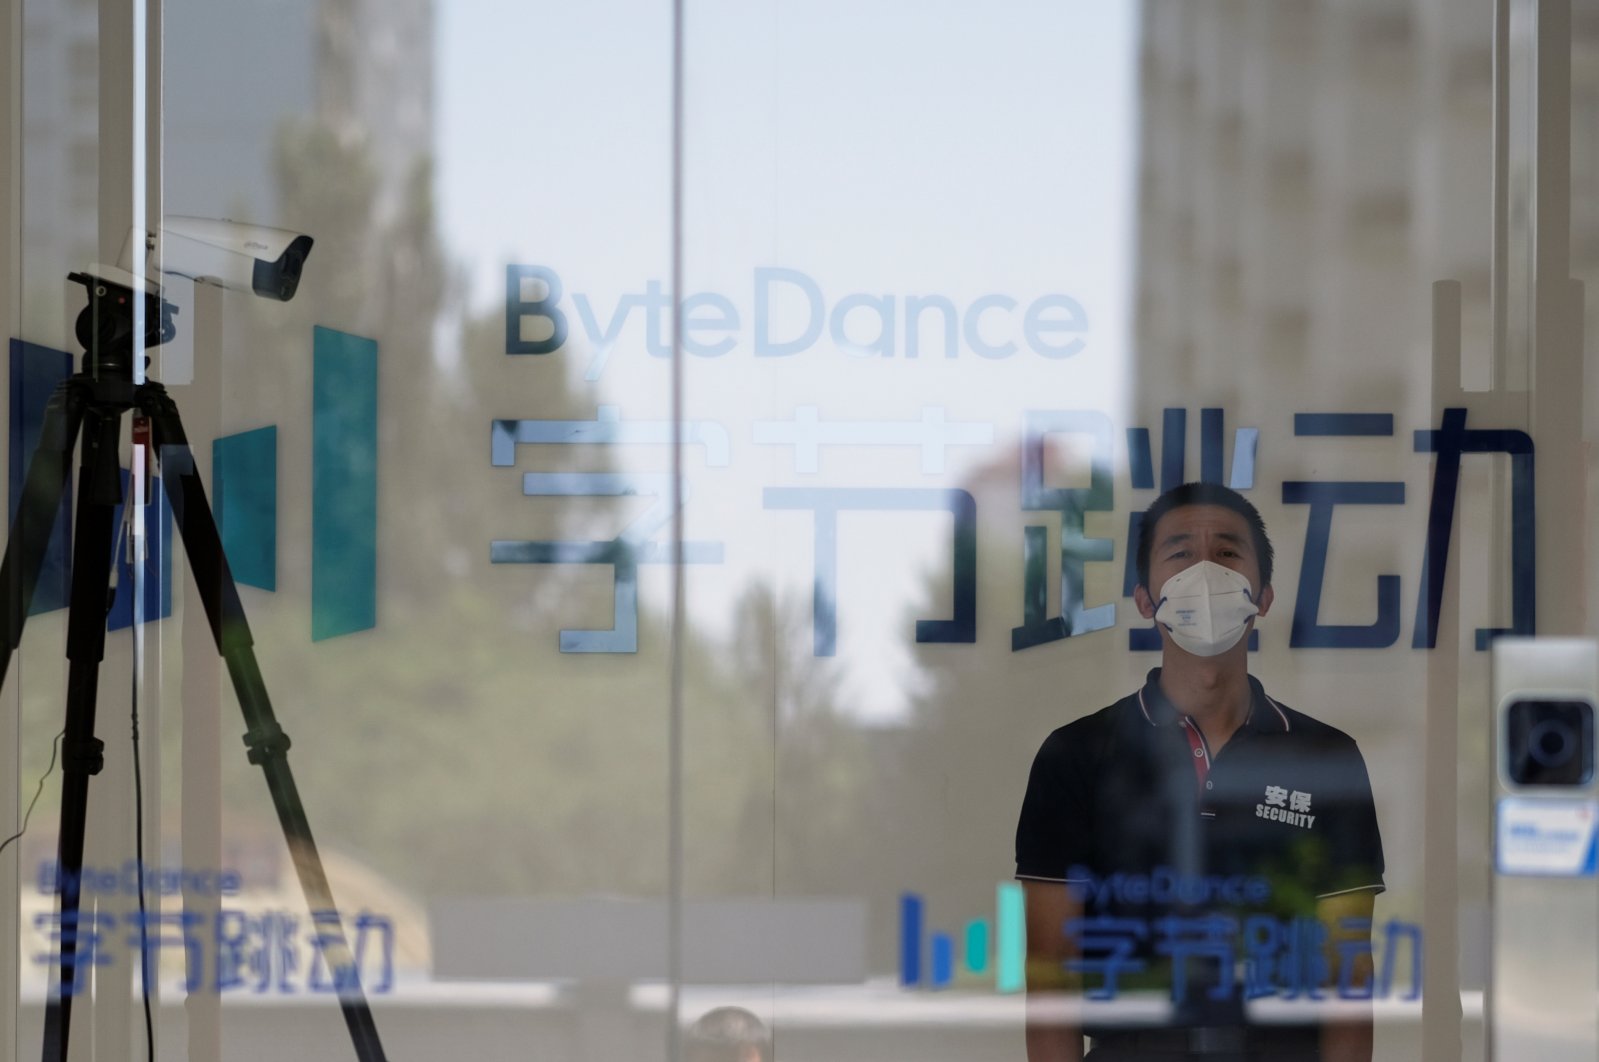 A security guard, wearing a face mask to protect against the coronavirus, stands near a surveillance camera at an office of Bytedance, the China-based company which owns the short video app TikTok, in Beijing, China, July 7, 2020. (Reuters Photo)